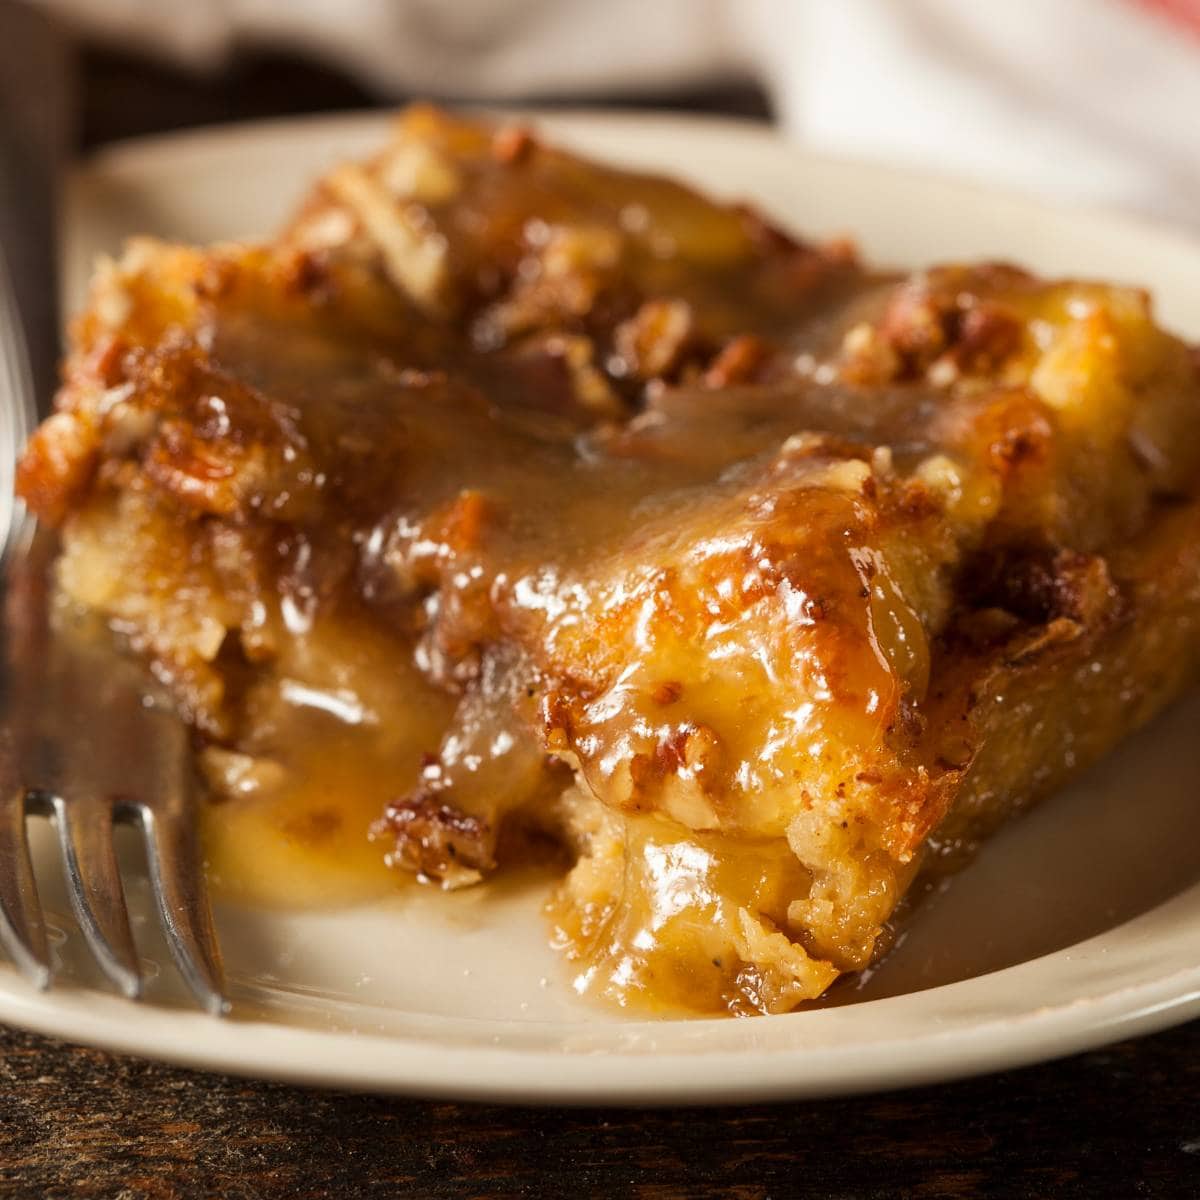 A square of bread pudding on a plate with caramel sauce.